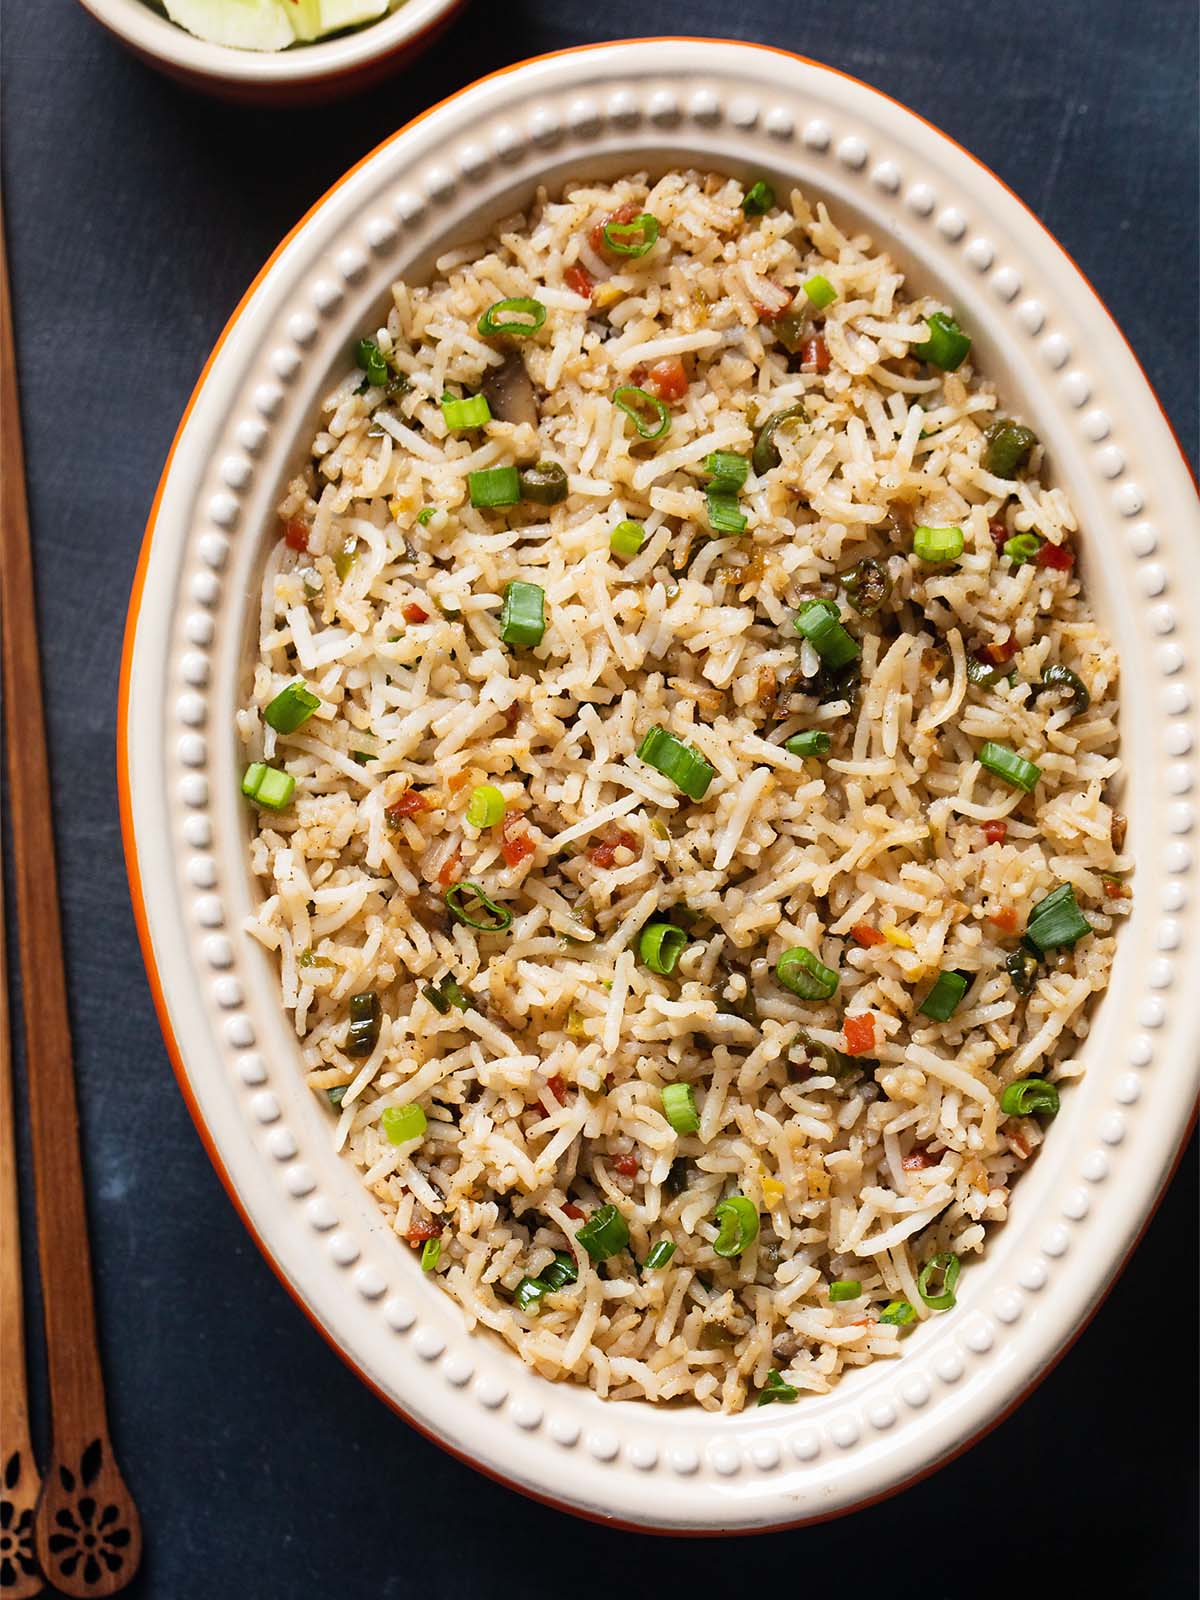 fried rice in a oval ceramic bowl with wooden chopsticks at side on a slate black board